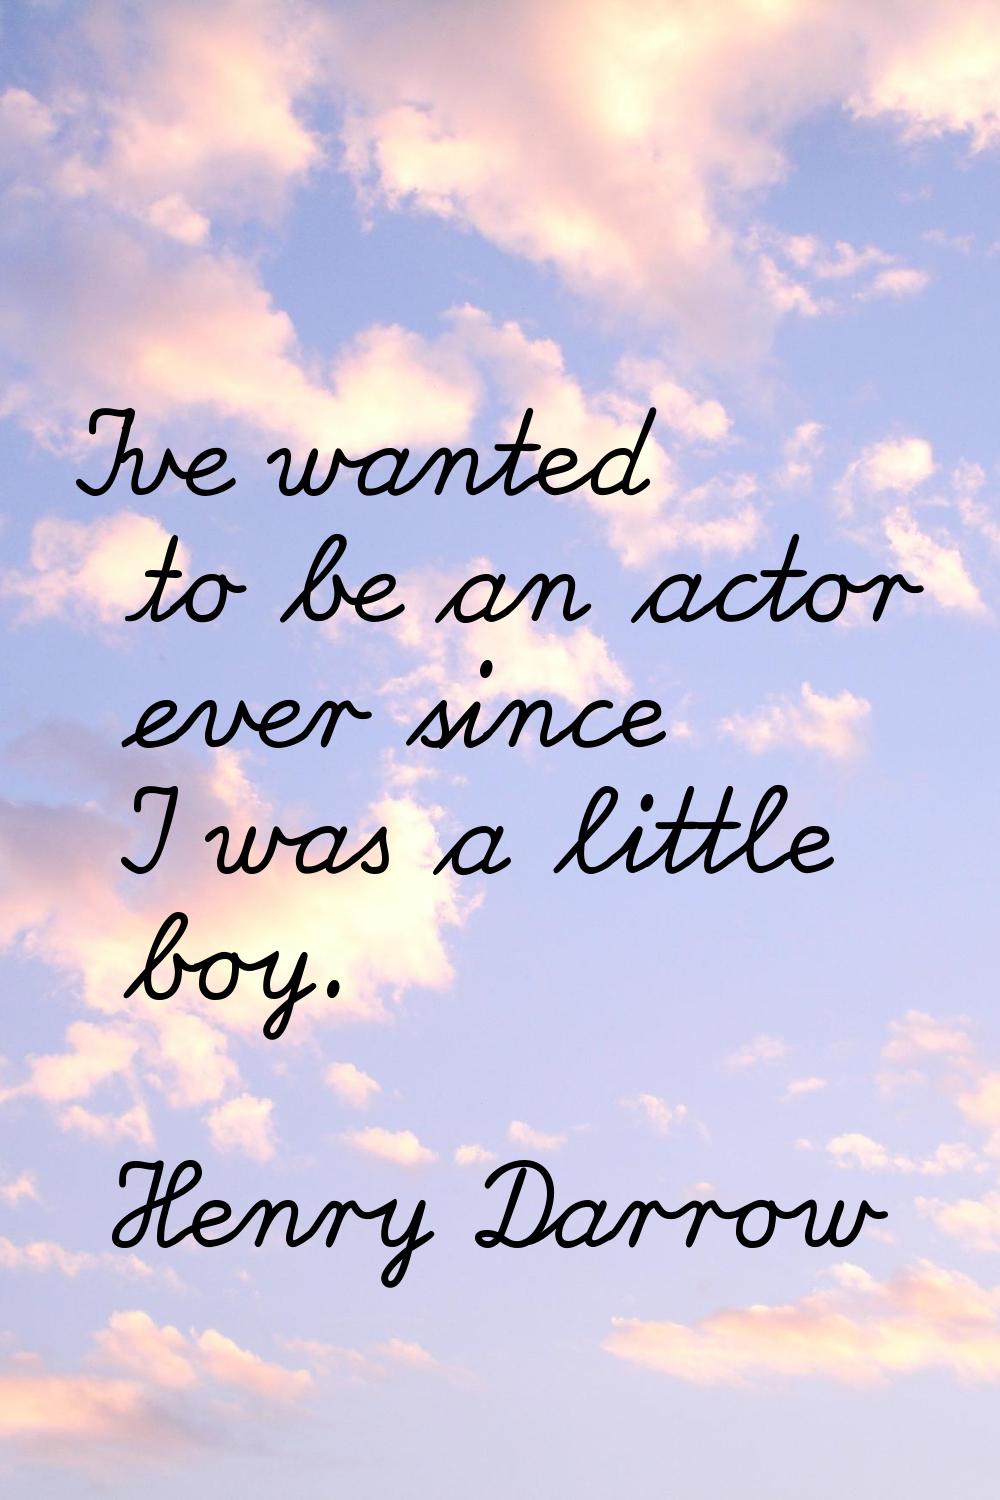 I've wanted to be an actor ever since I was a little boy.